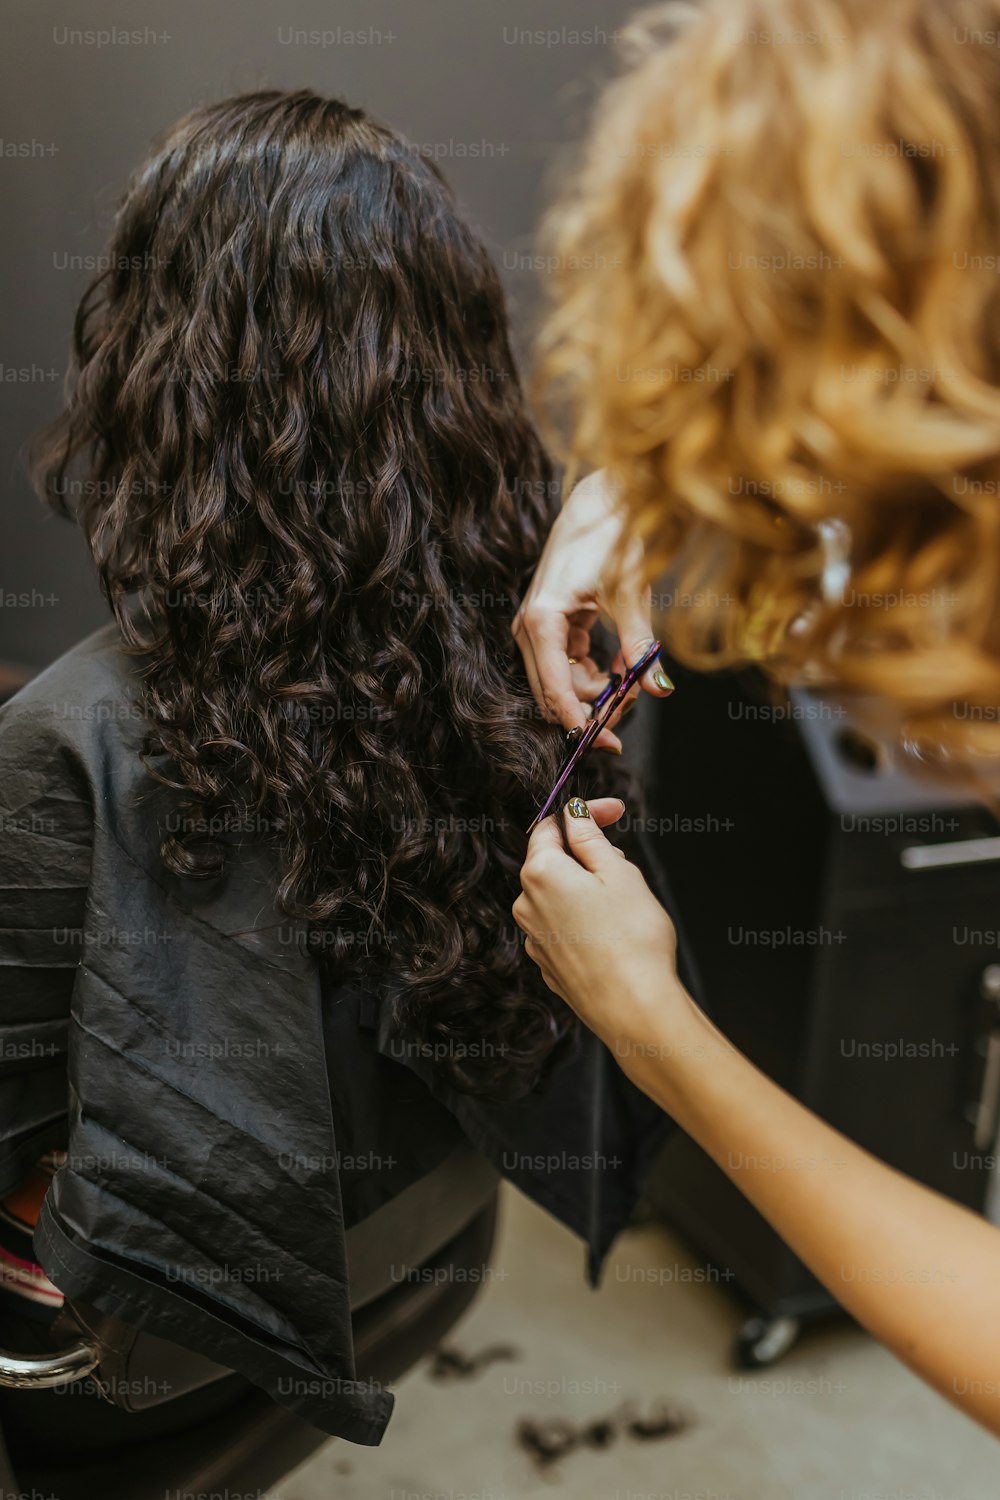 a woman cutting another woman's hair with scissors